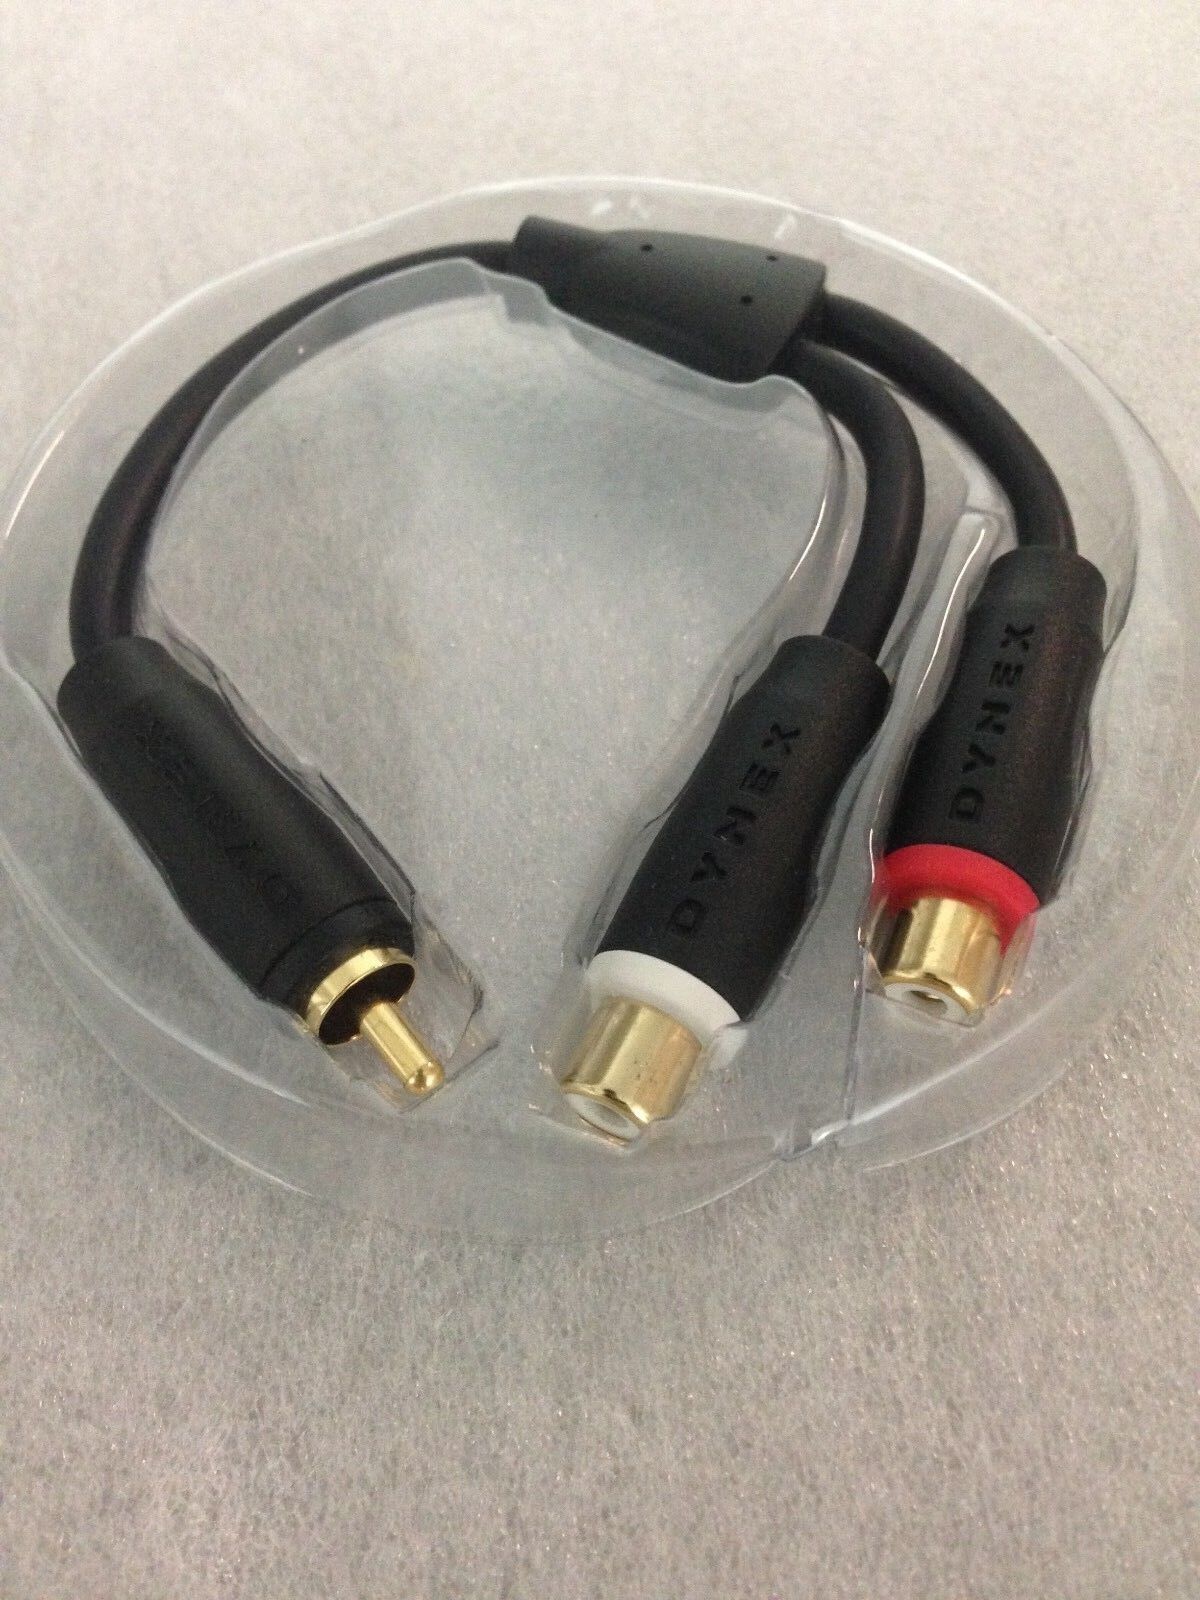 Dynex DX-AV242 RCA Y-Adapter Cable (2 F to 1 M)  